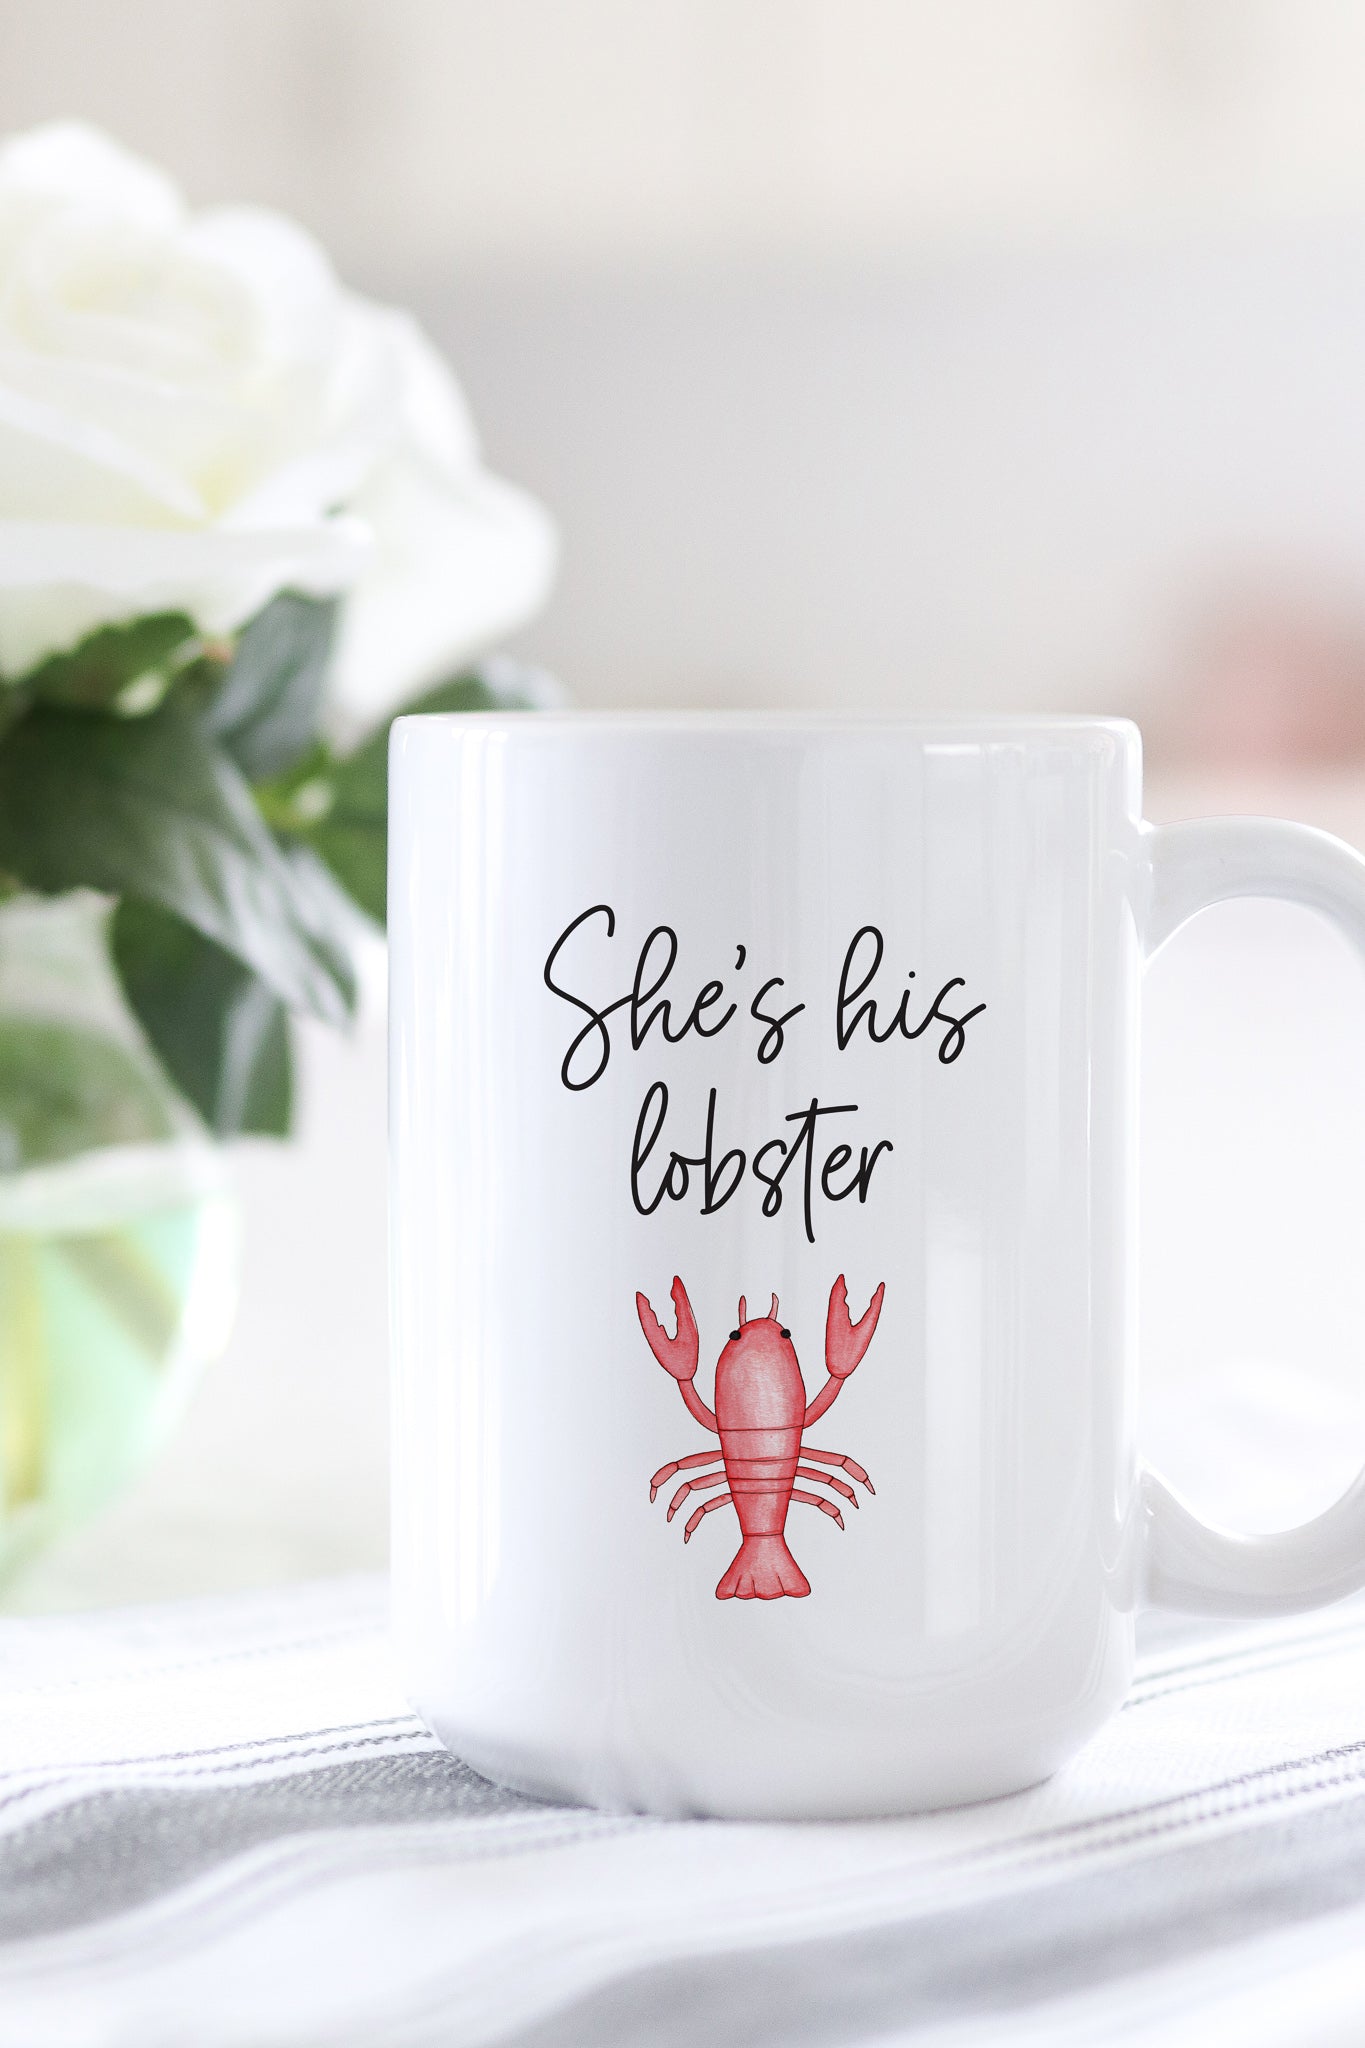 She's his lobster. This is the perfect mug for anyone who loves all things Friends! 